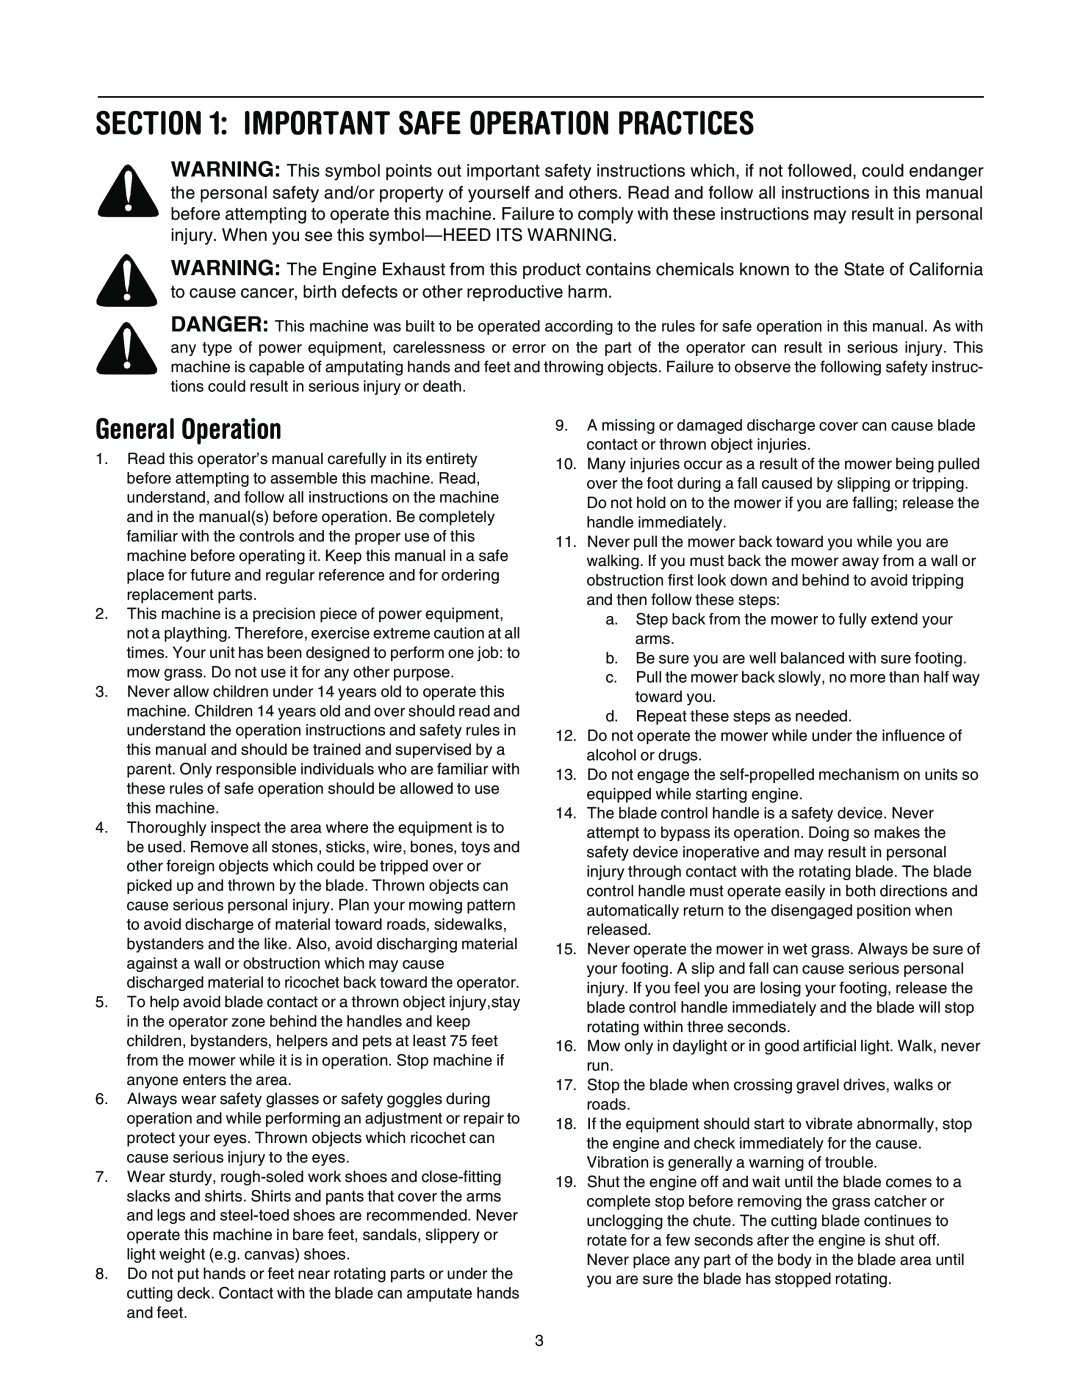 Bolens 589 manual Important Safe Operation Practices, General Operation 